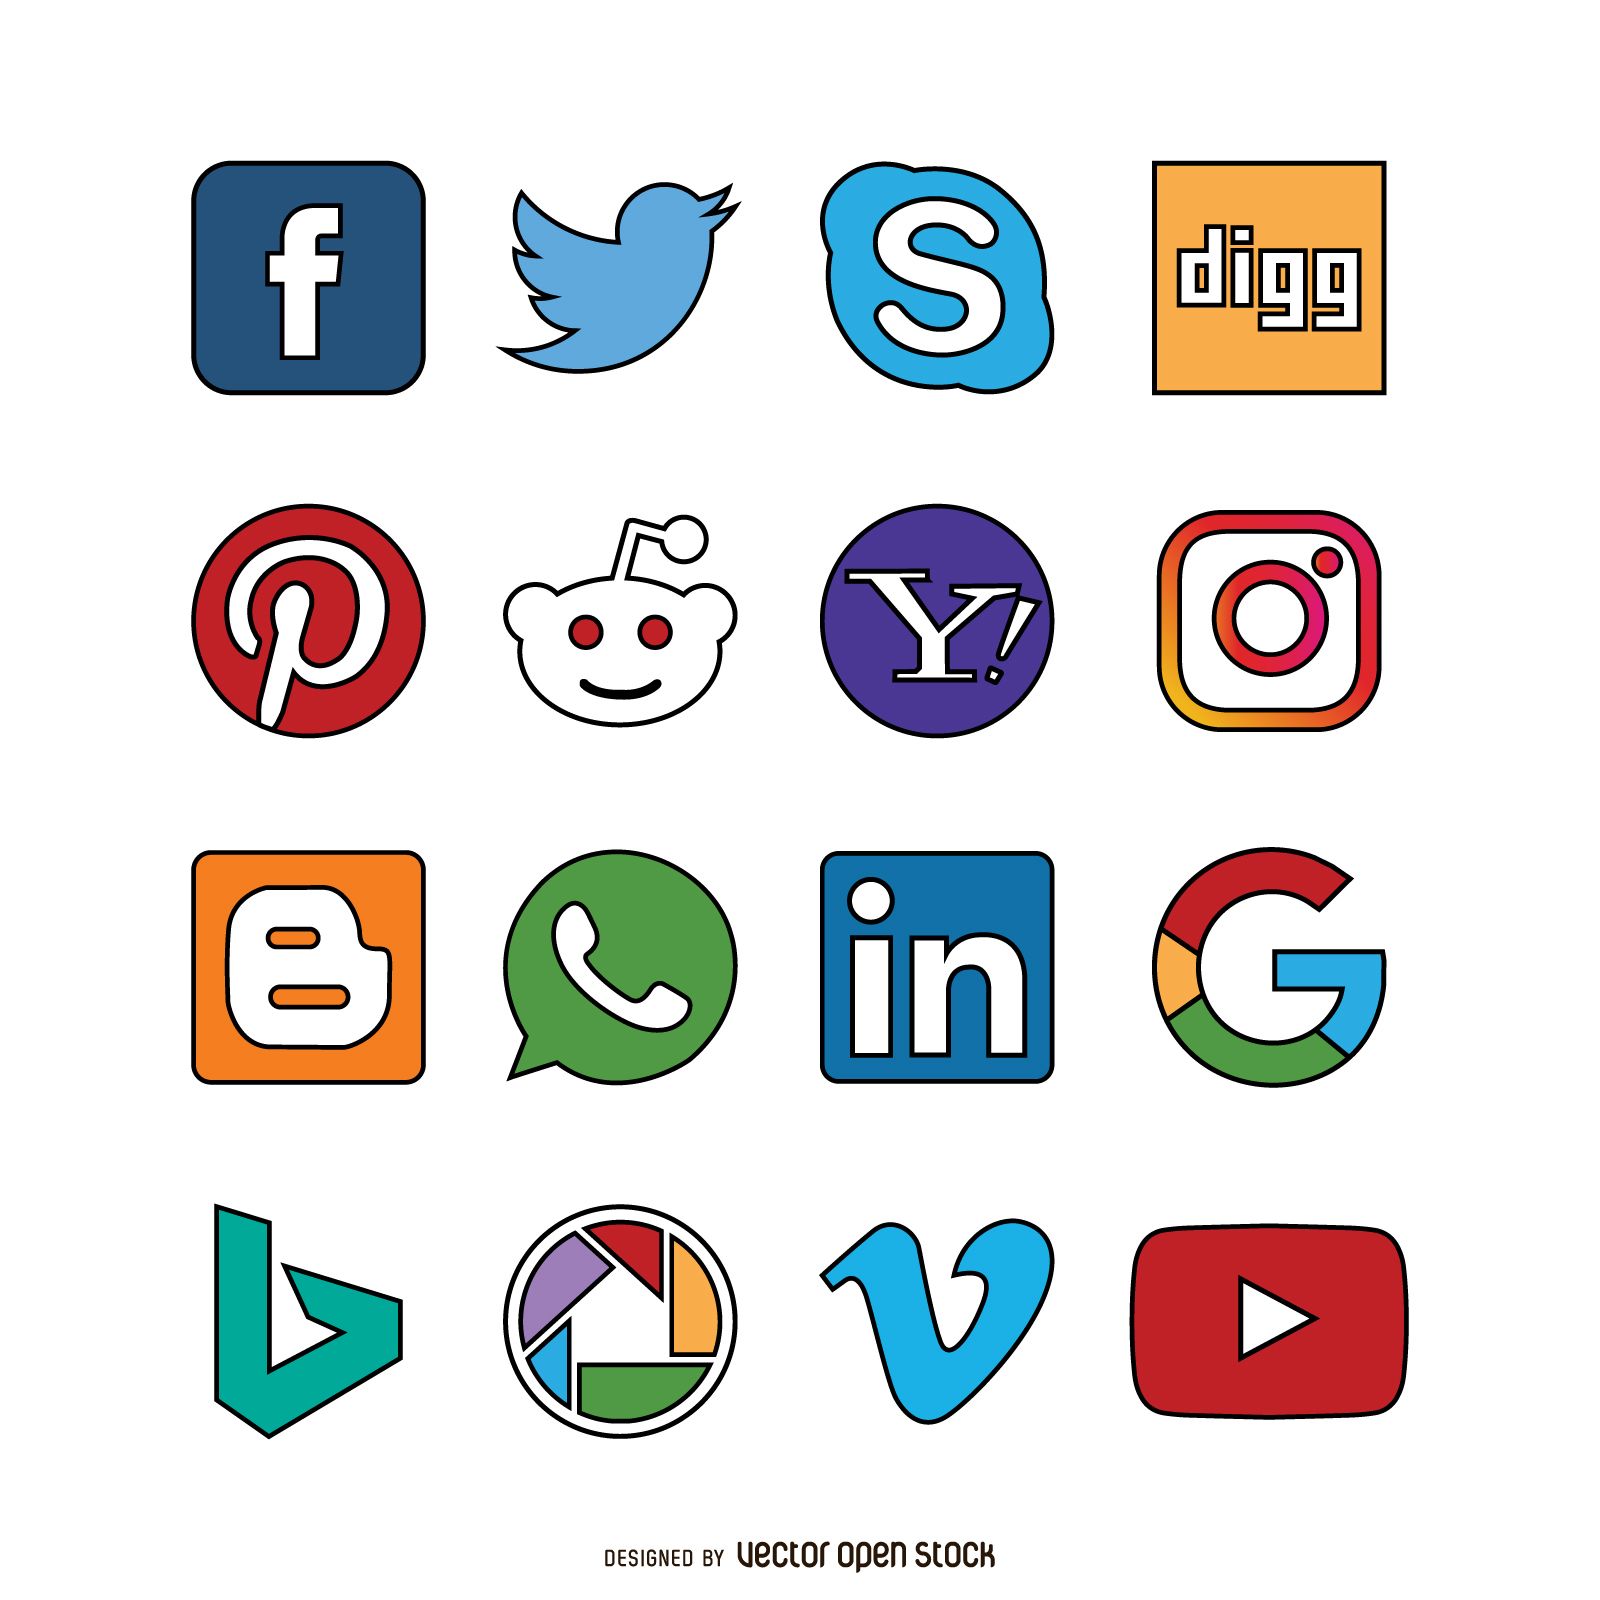 Free Social Media Icon Vector at Vectorified.com | Collection of Free ...